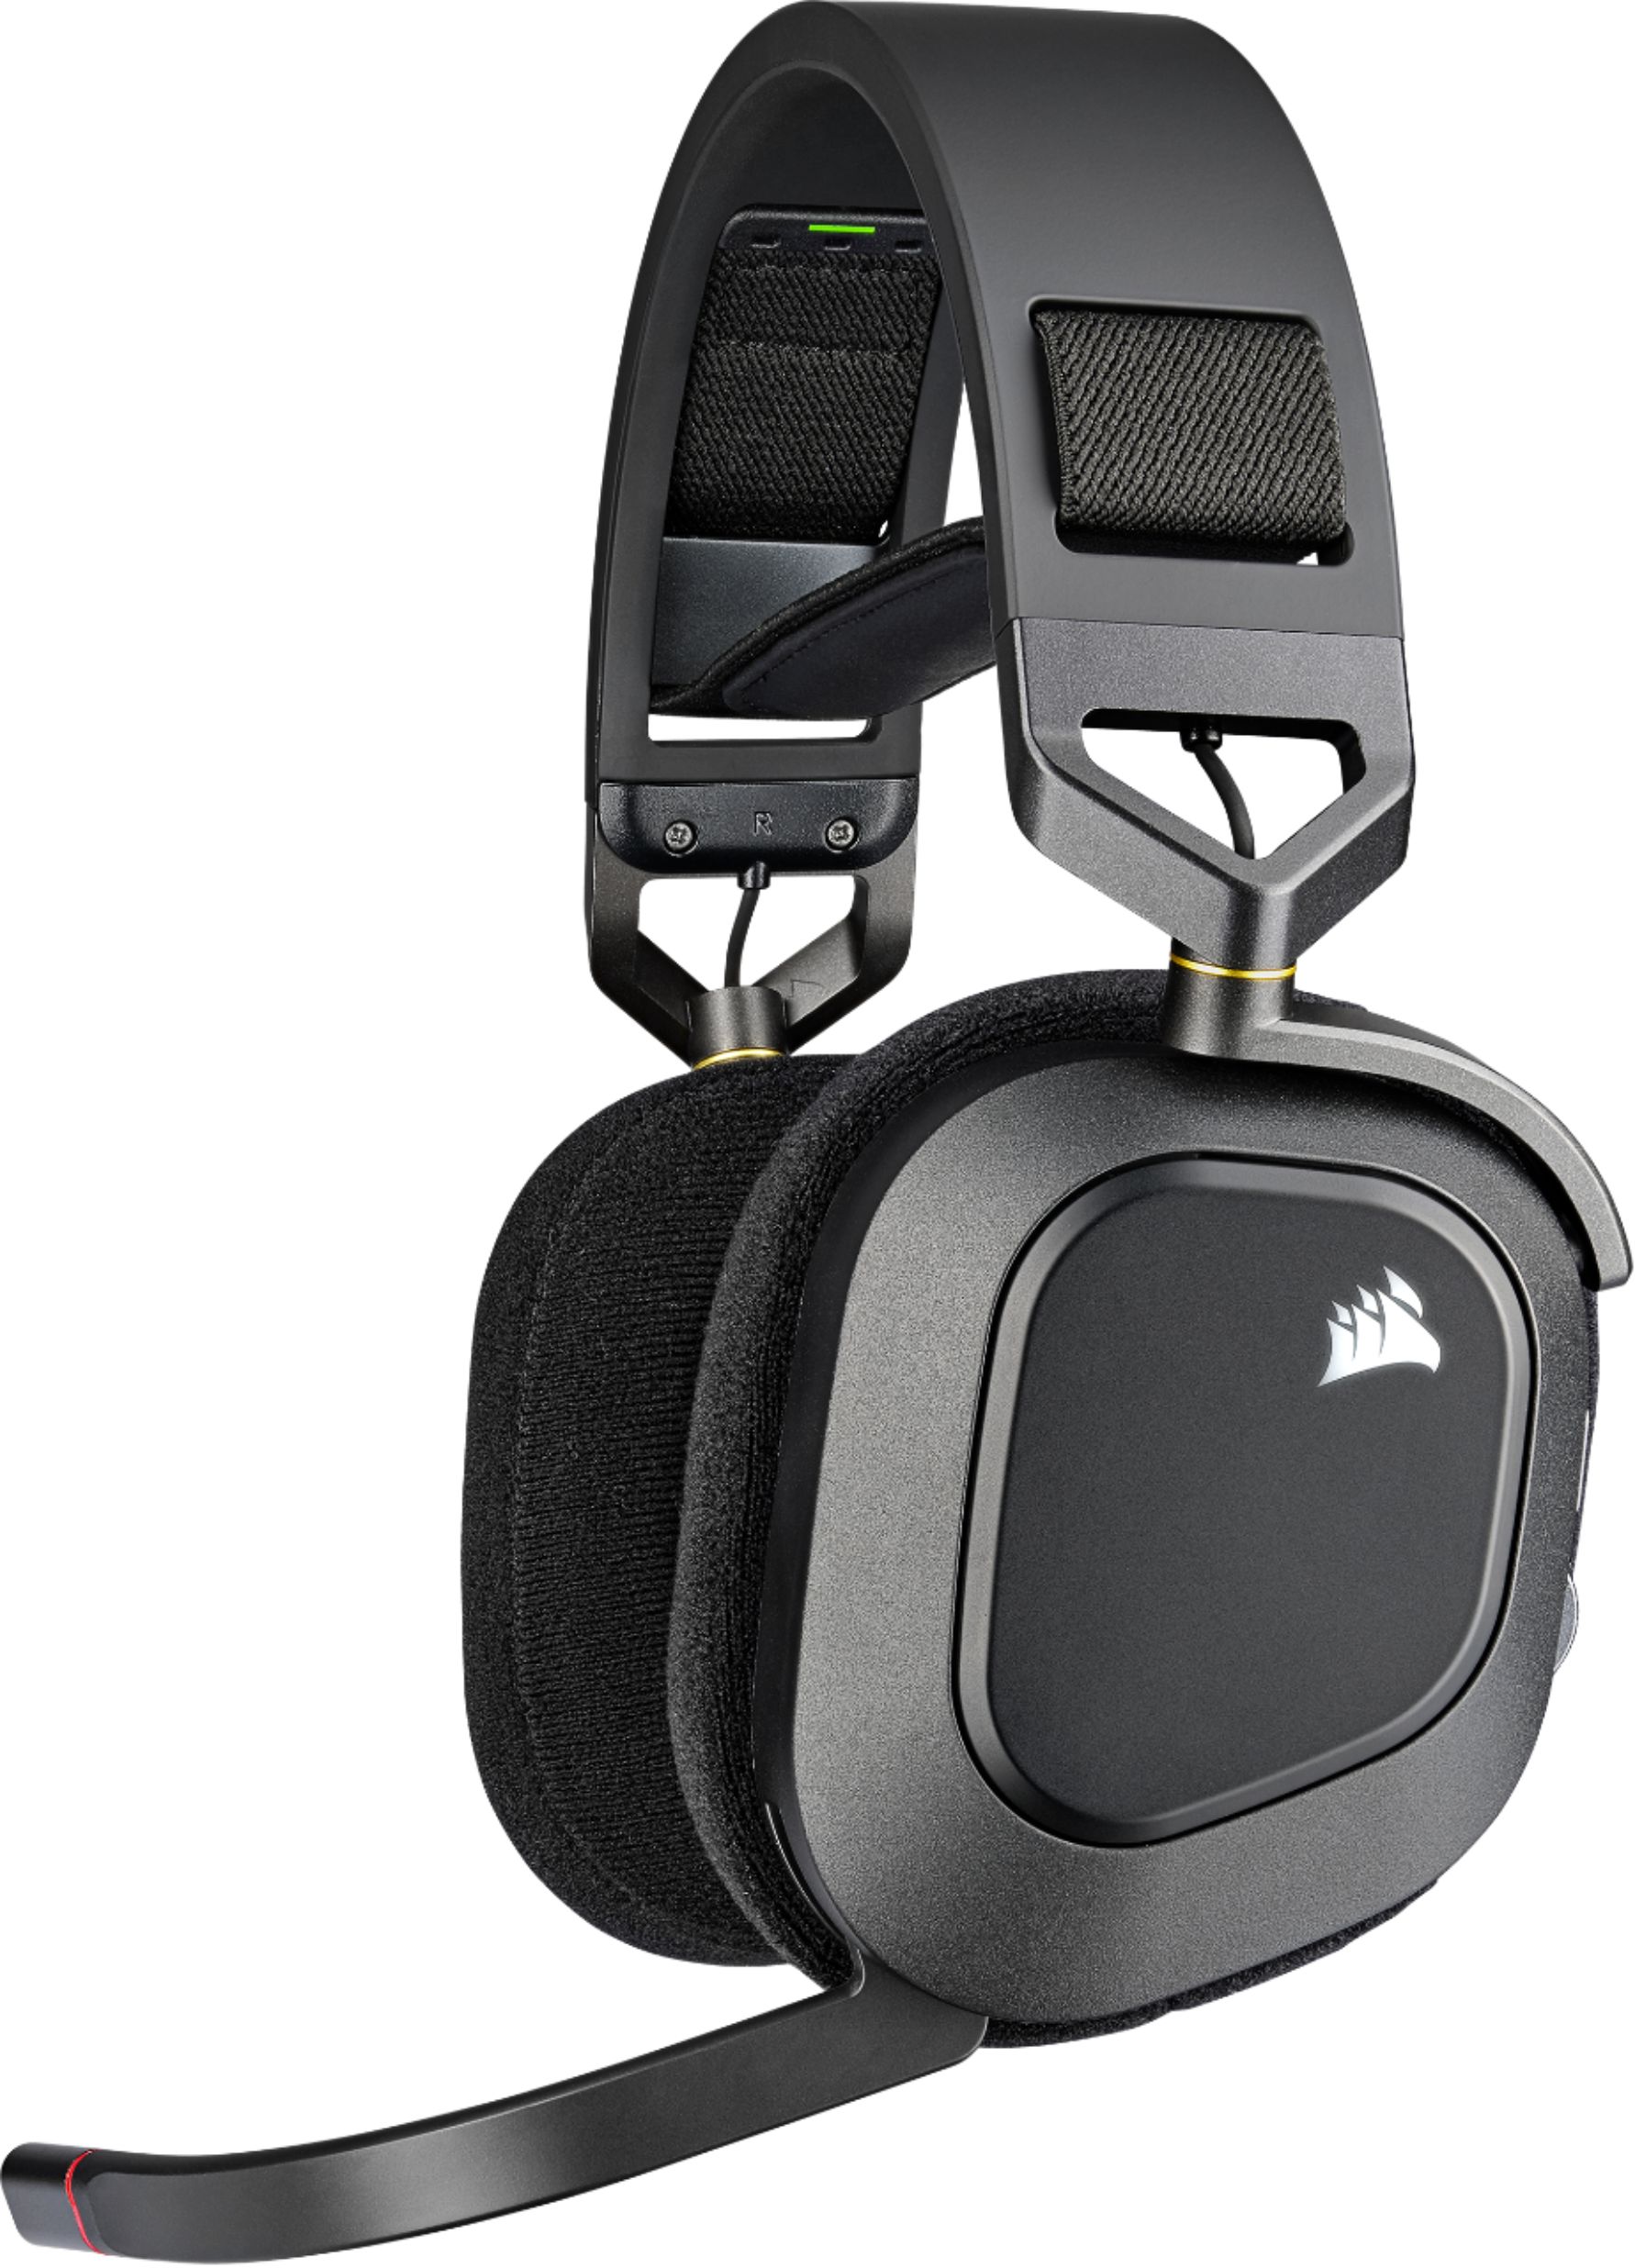 CORSAIR HS80 RGB WIRELESS Dolby Gaming Headset PC, Mac, PS5|PS4 with Broadcast-Grade Omni-Directional Microphone Carbon CA-9011235-NA - Best Buy